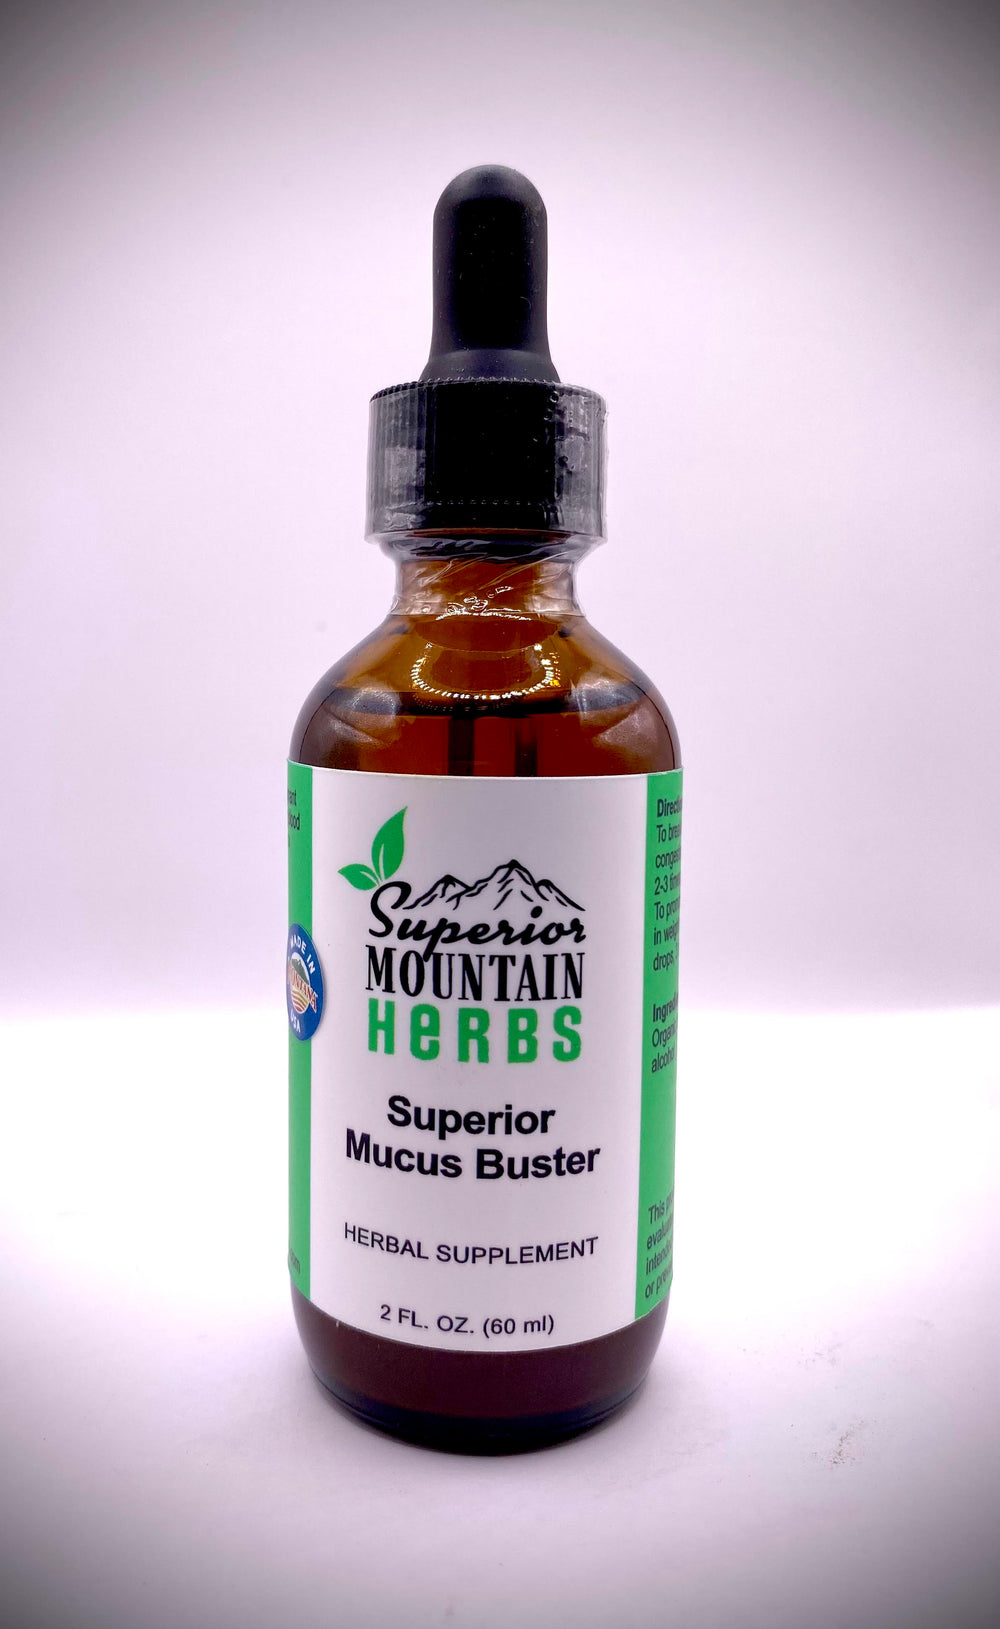 Superior Mucus Buster